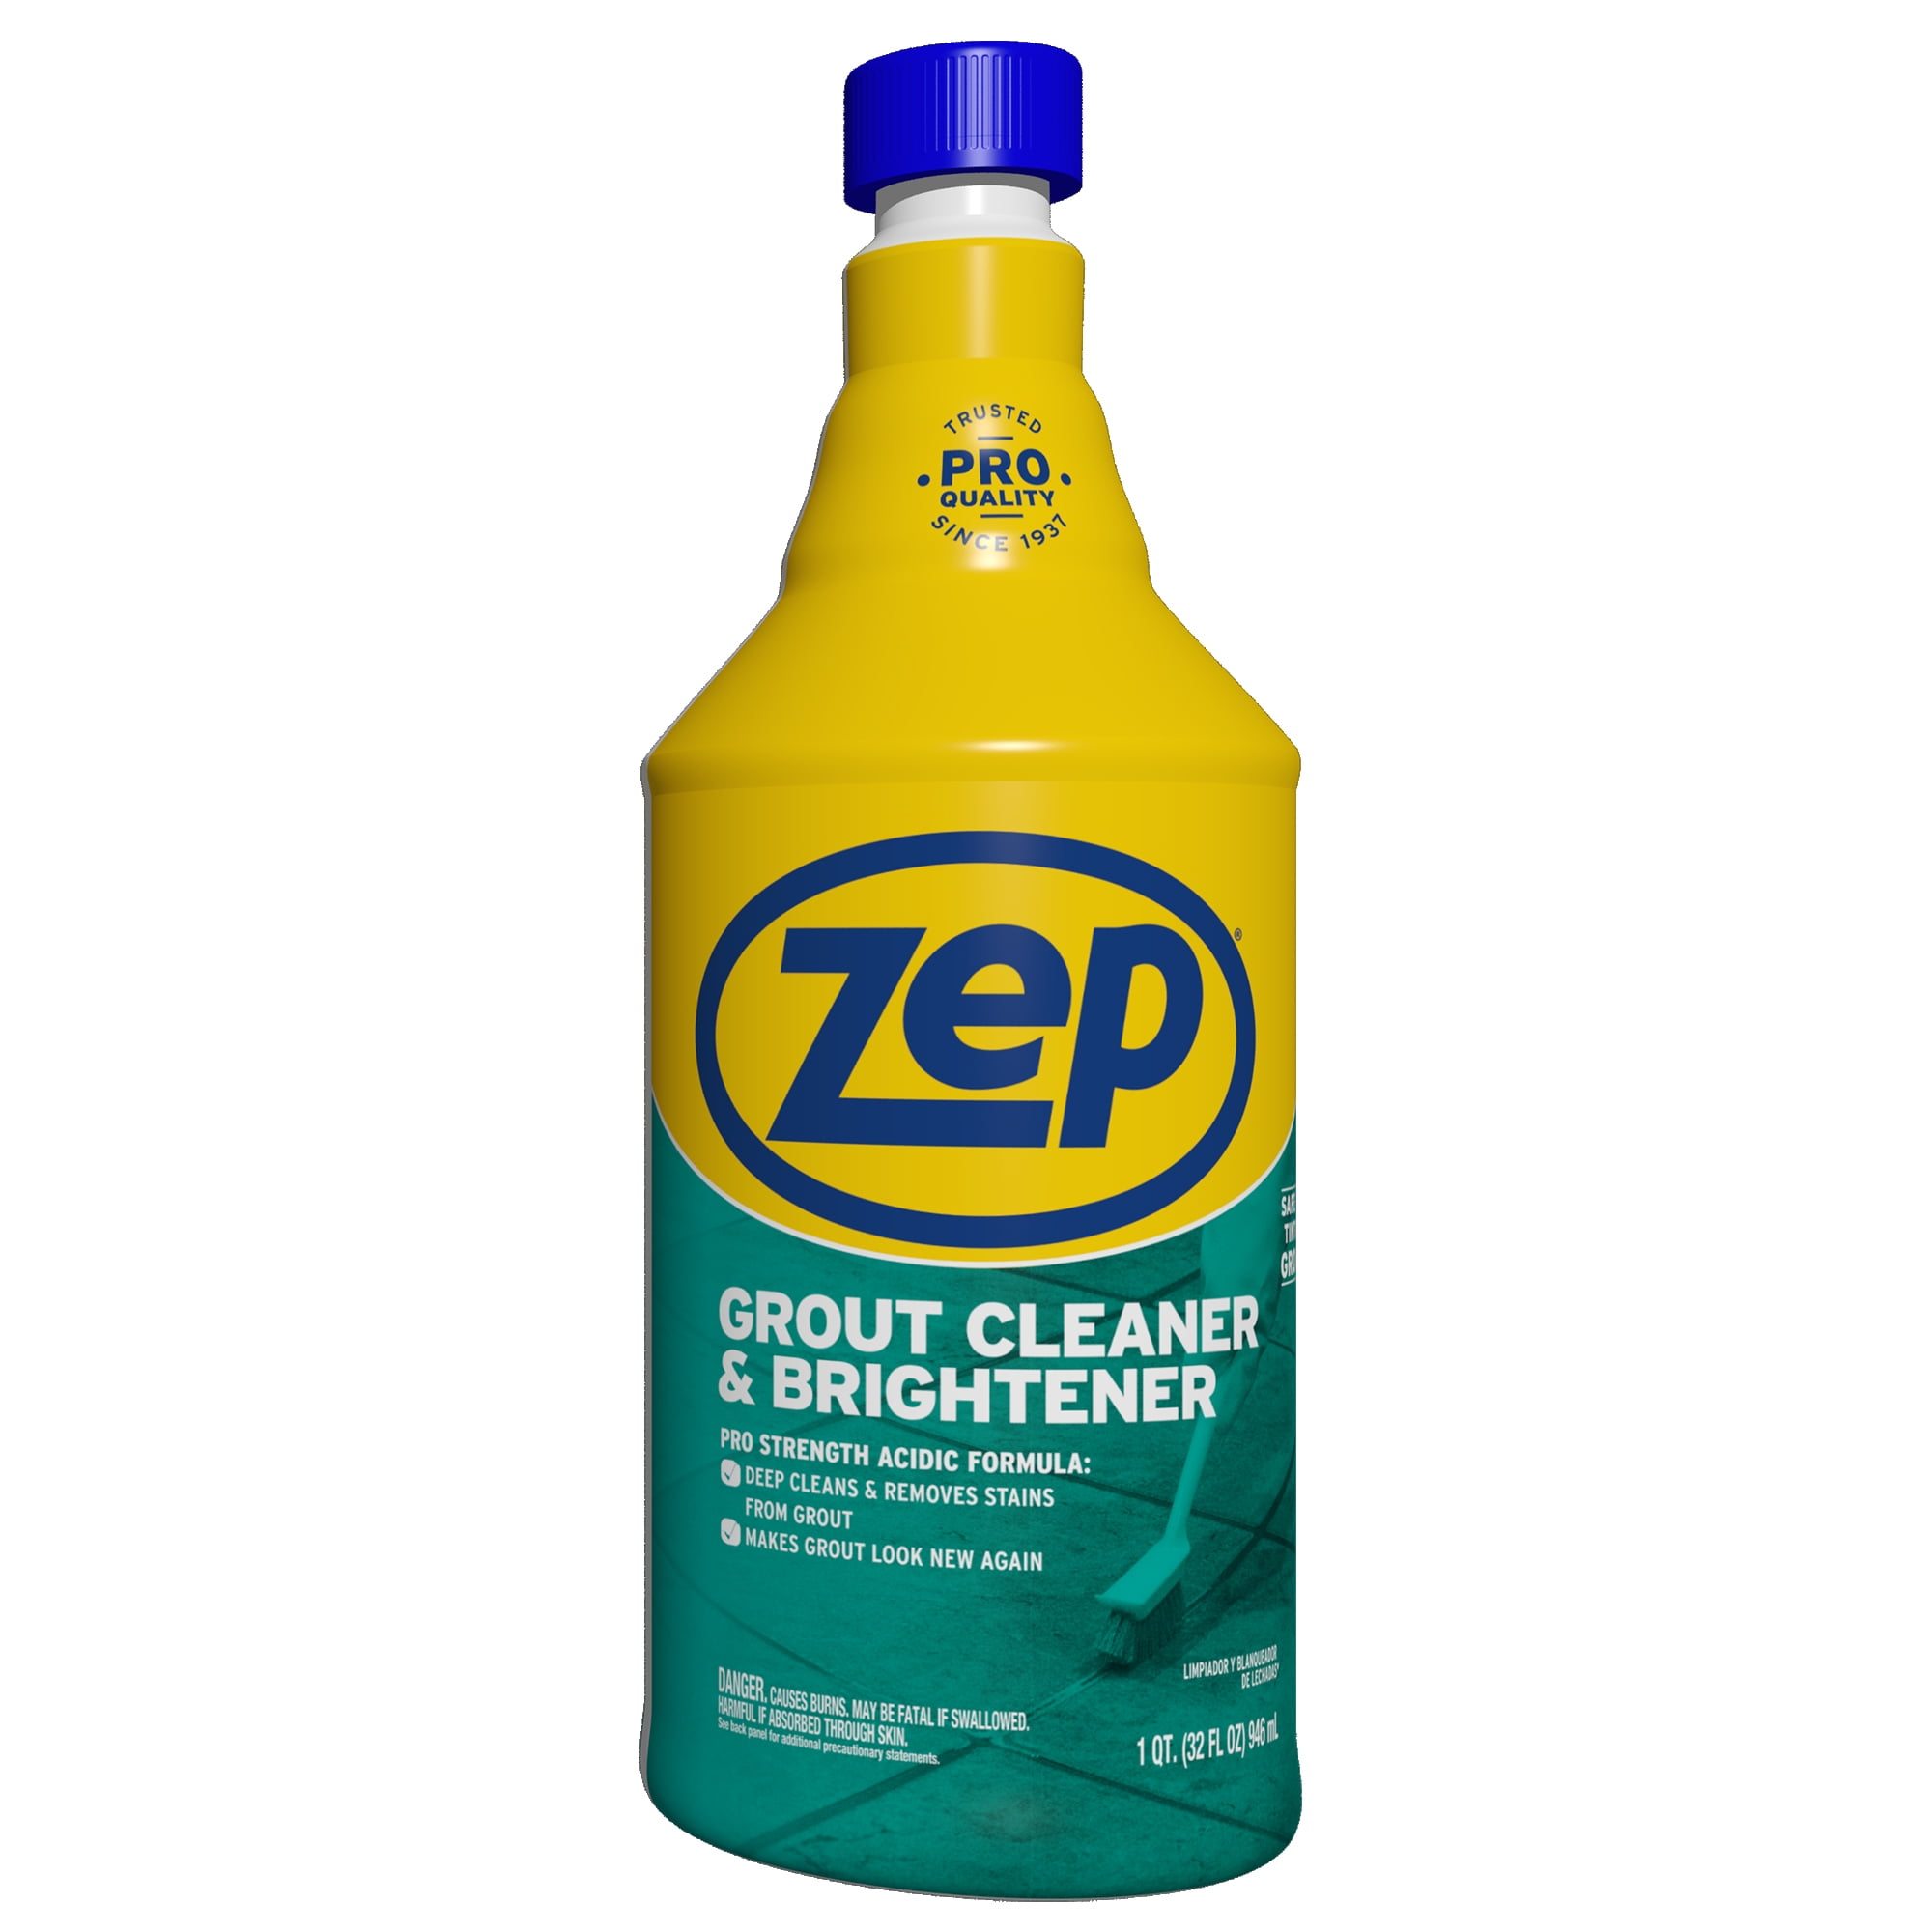 Shop Zep Grout Cleaning Kit with Zep Grout Cleaner and Rubbermaid Cordless Cleaning  Brush (Brush, Cleaner, Spray Bottle, and 50pk Mircofiber Cloth) at